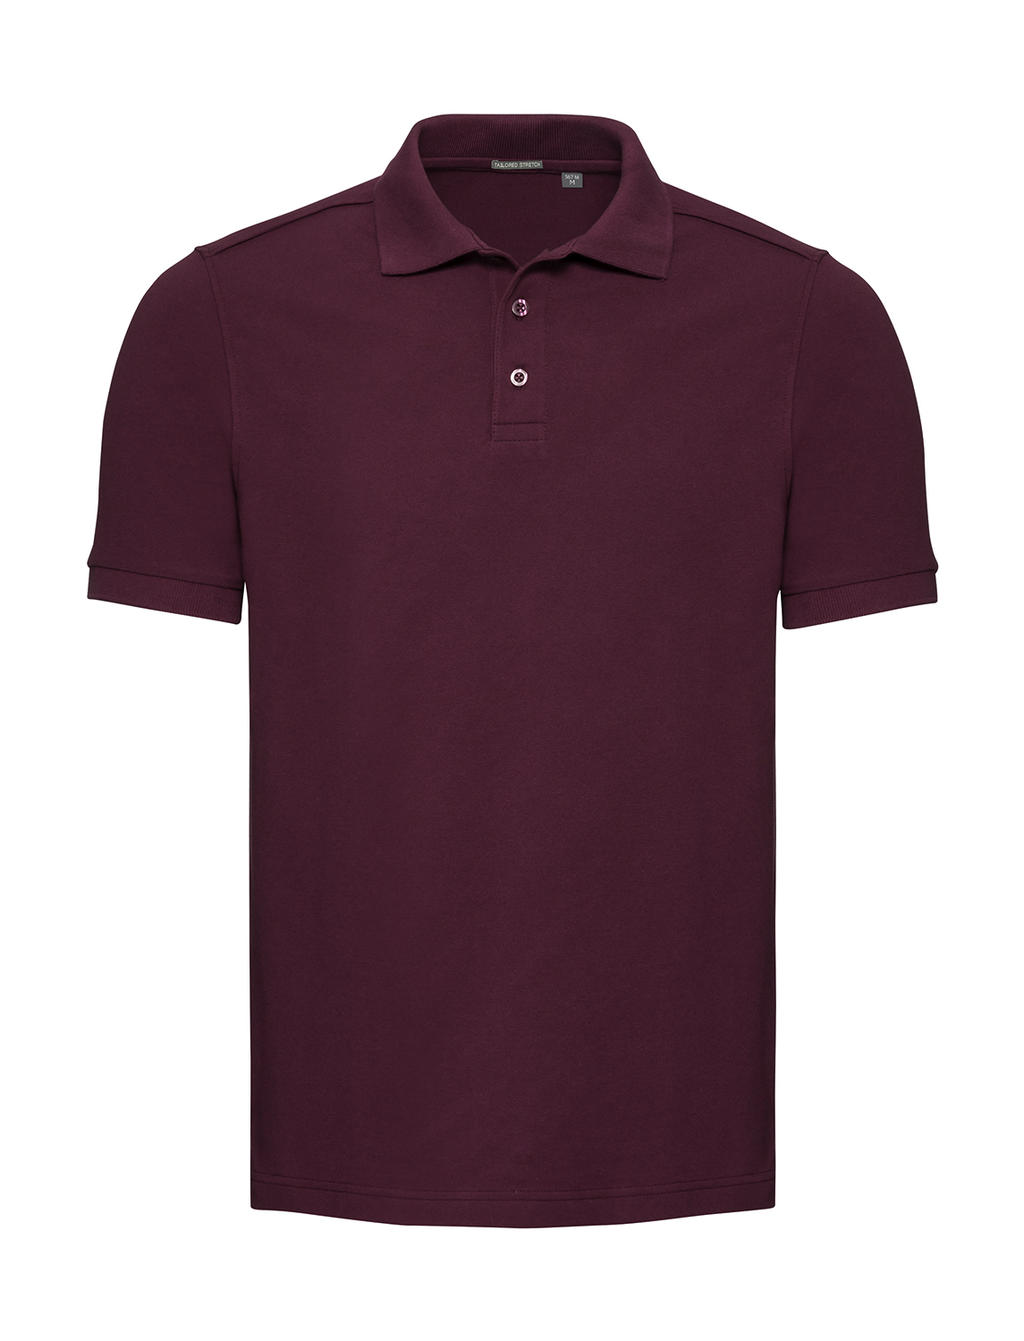  Mens Tailored Stretch Polo in Farbe Burgundy